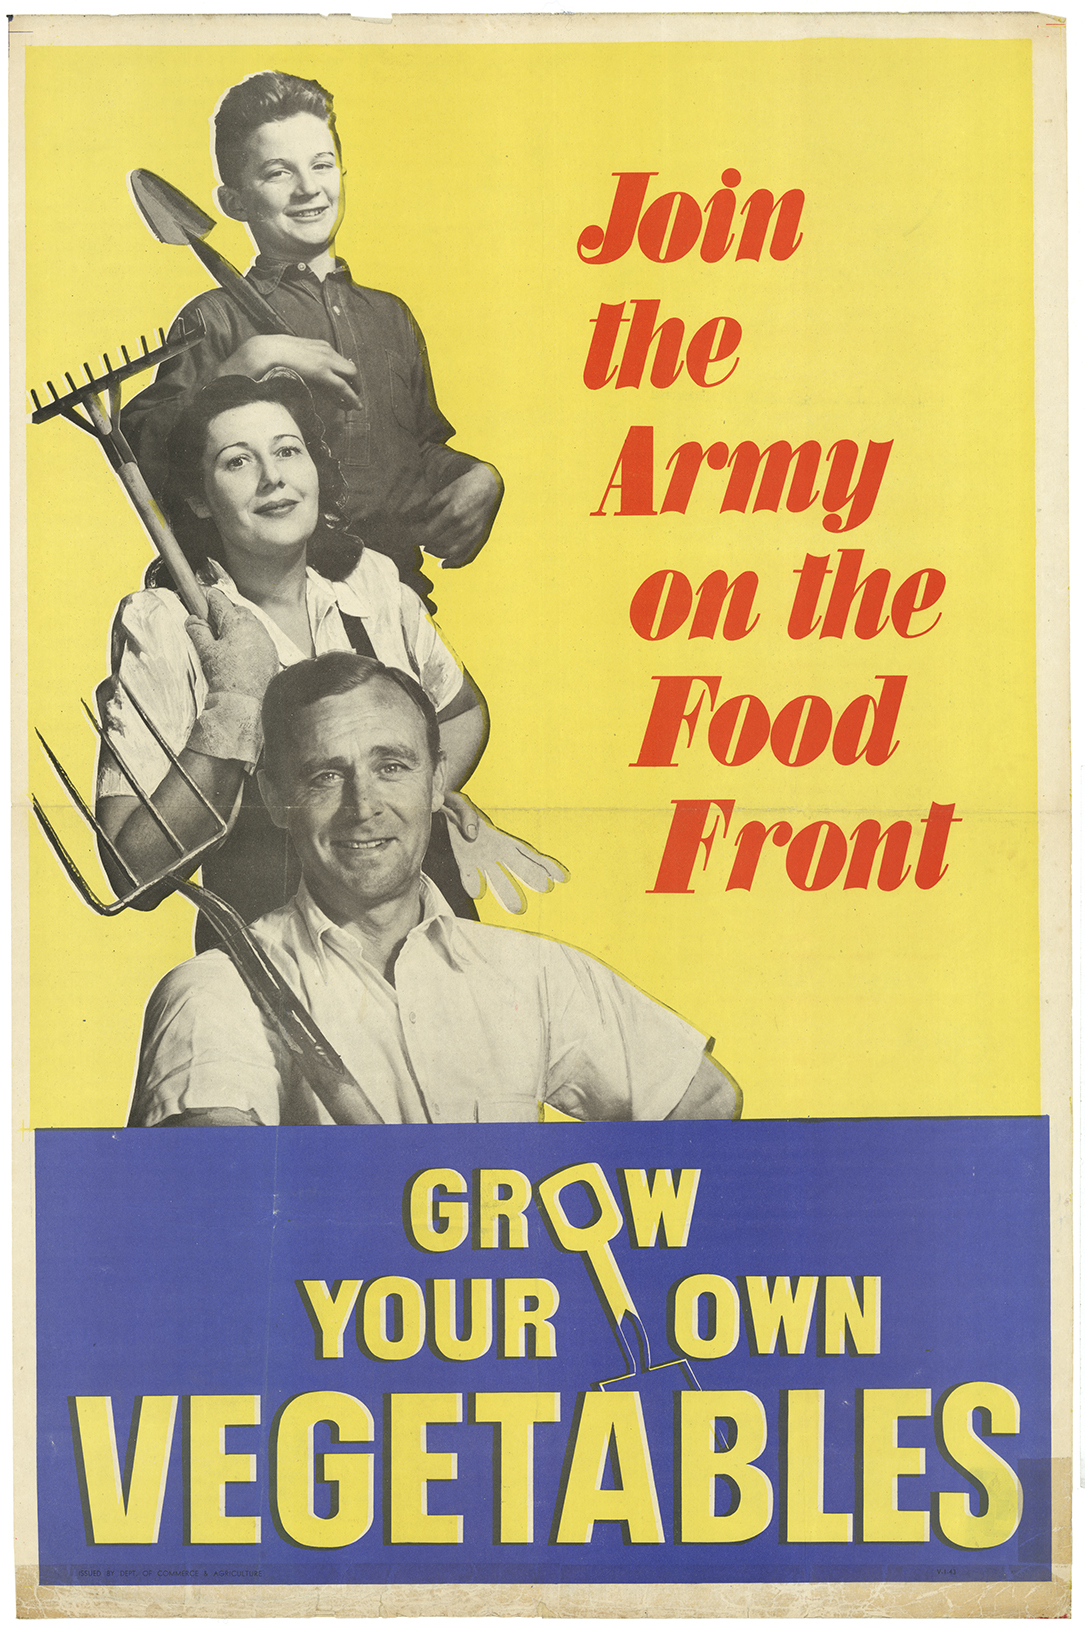 A poster with man, woman and child holding gardening utensils photo montaged onto a yellow and blue background stating "Join the army on the food front. Grow your own vegetables".